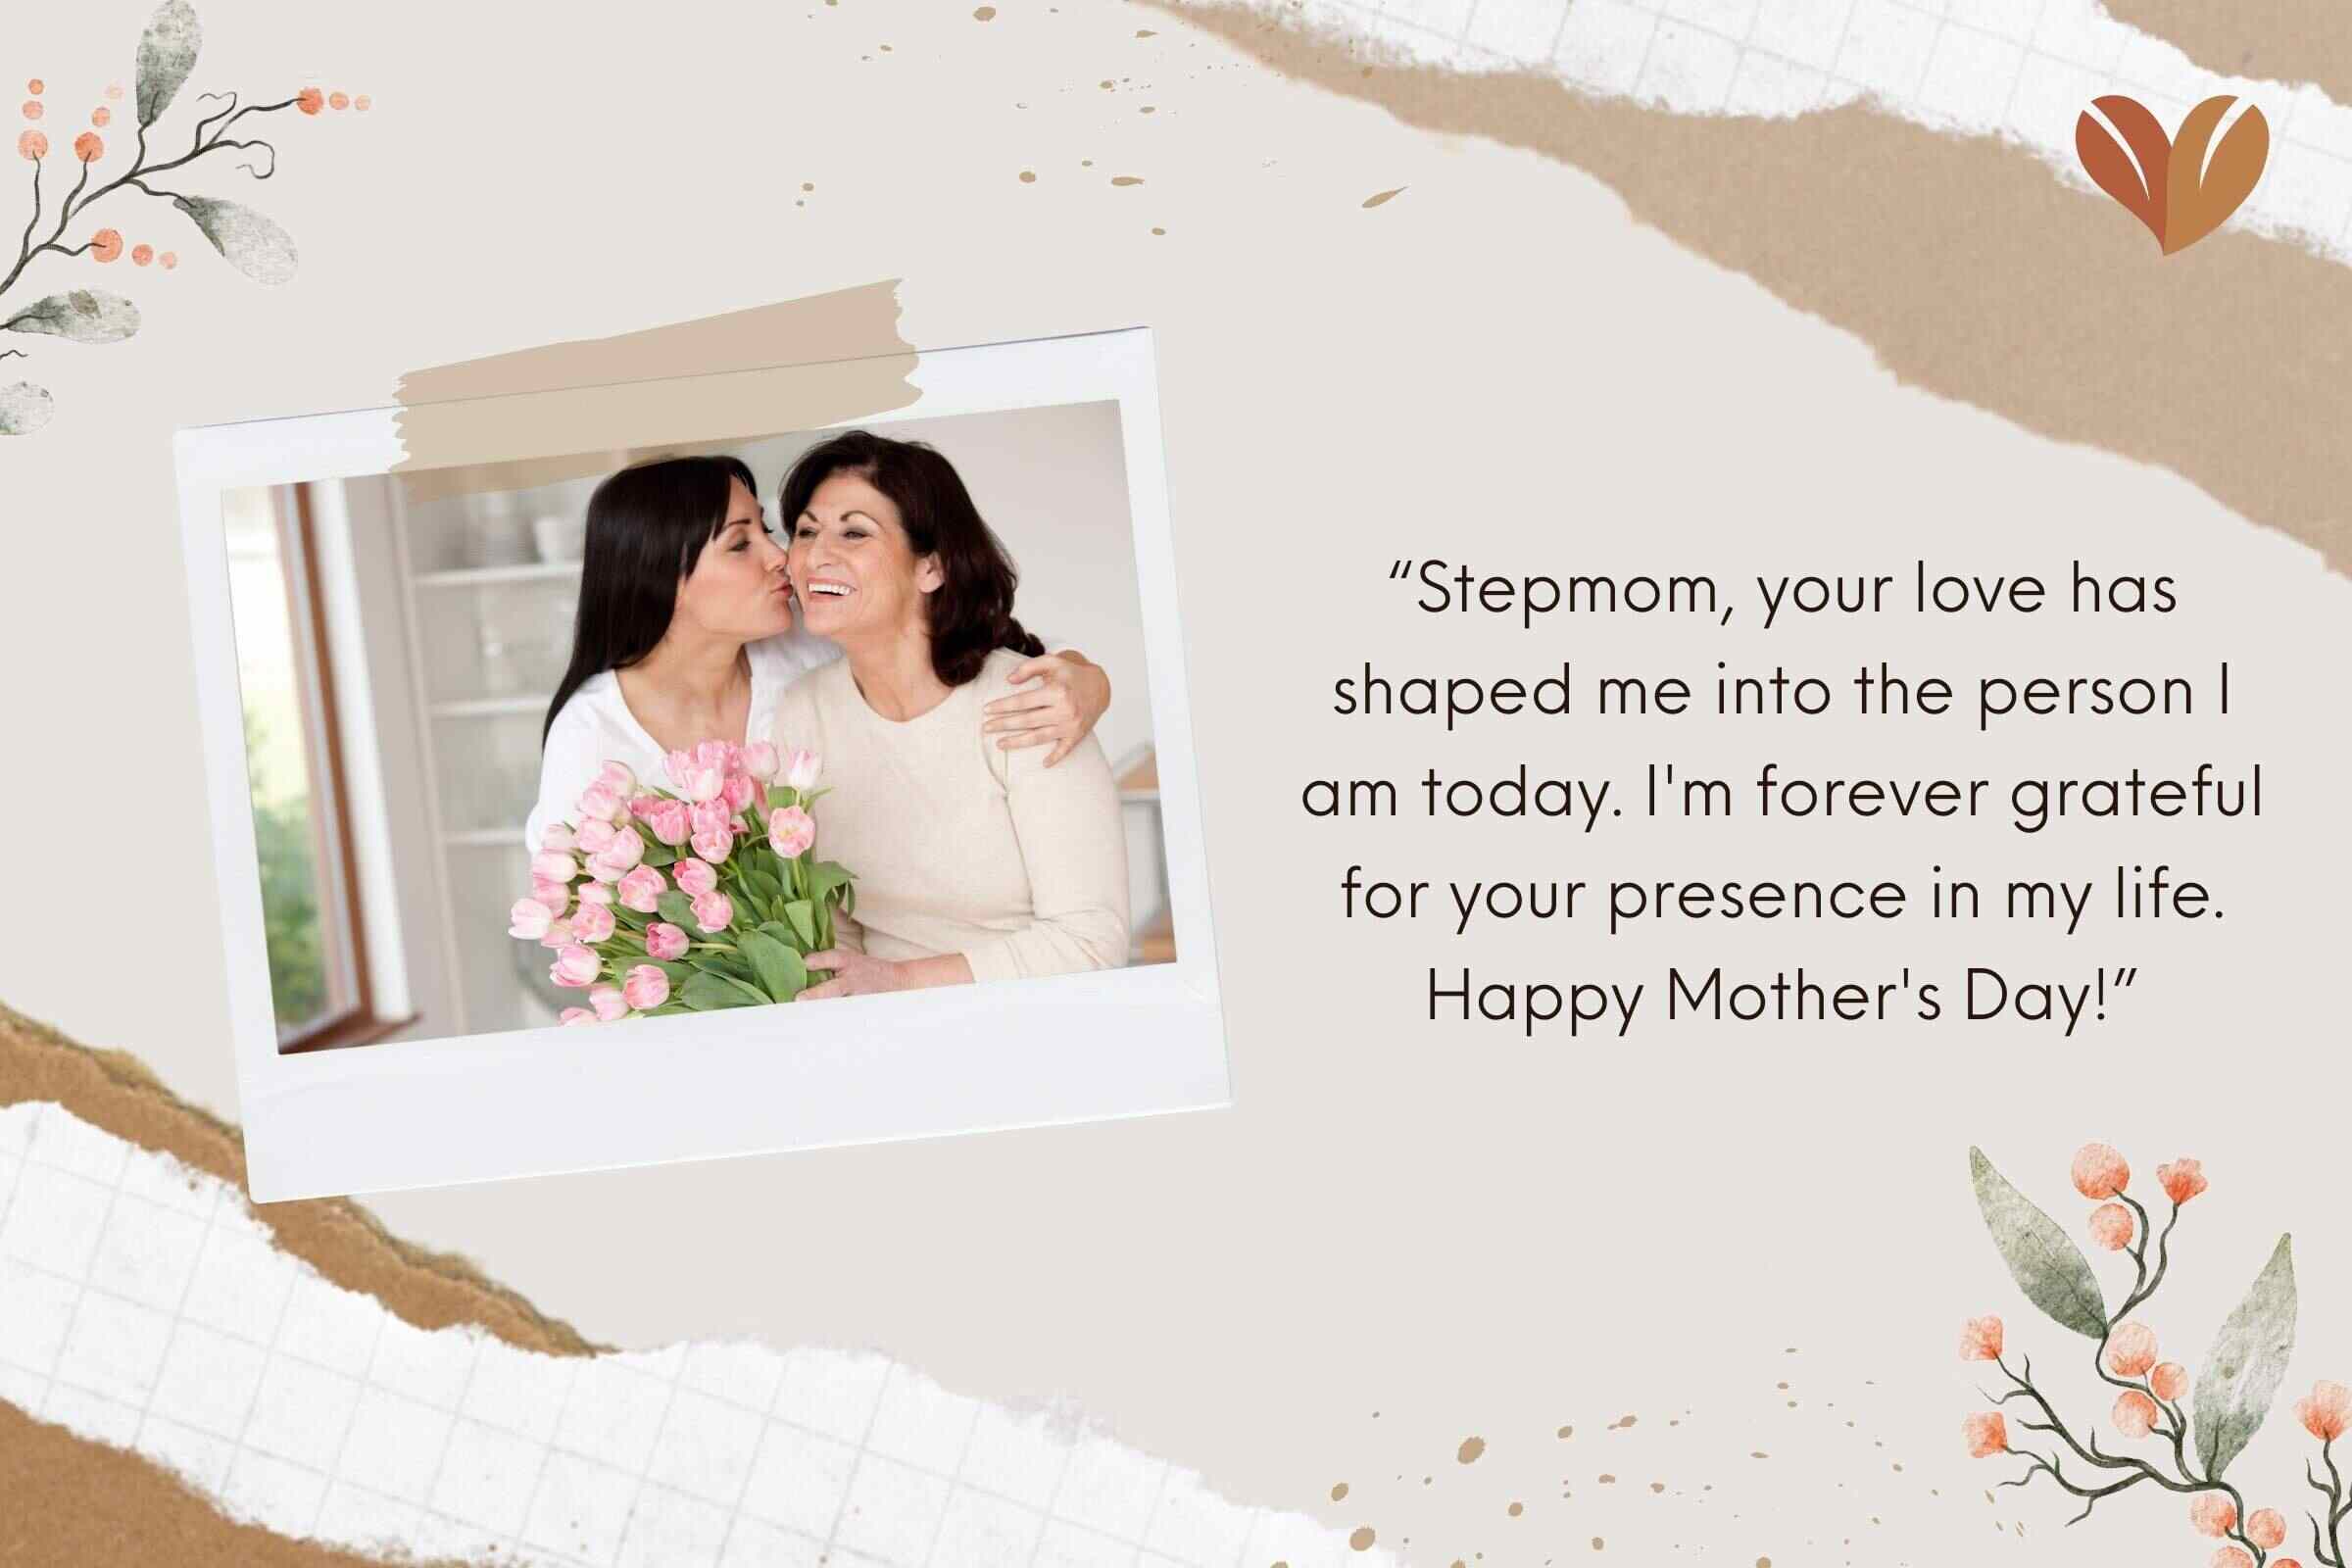 Mother's Day Card Sayings for Stepmoms: Heartfelt Messages from a Son